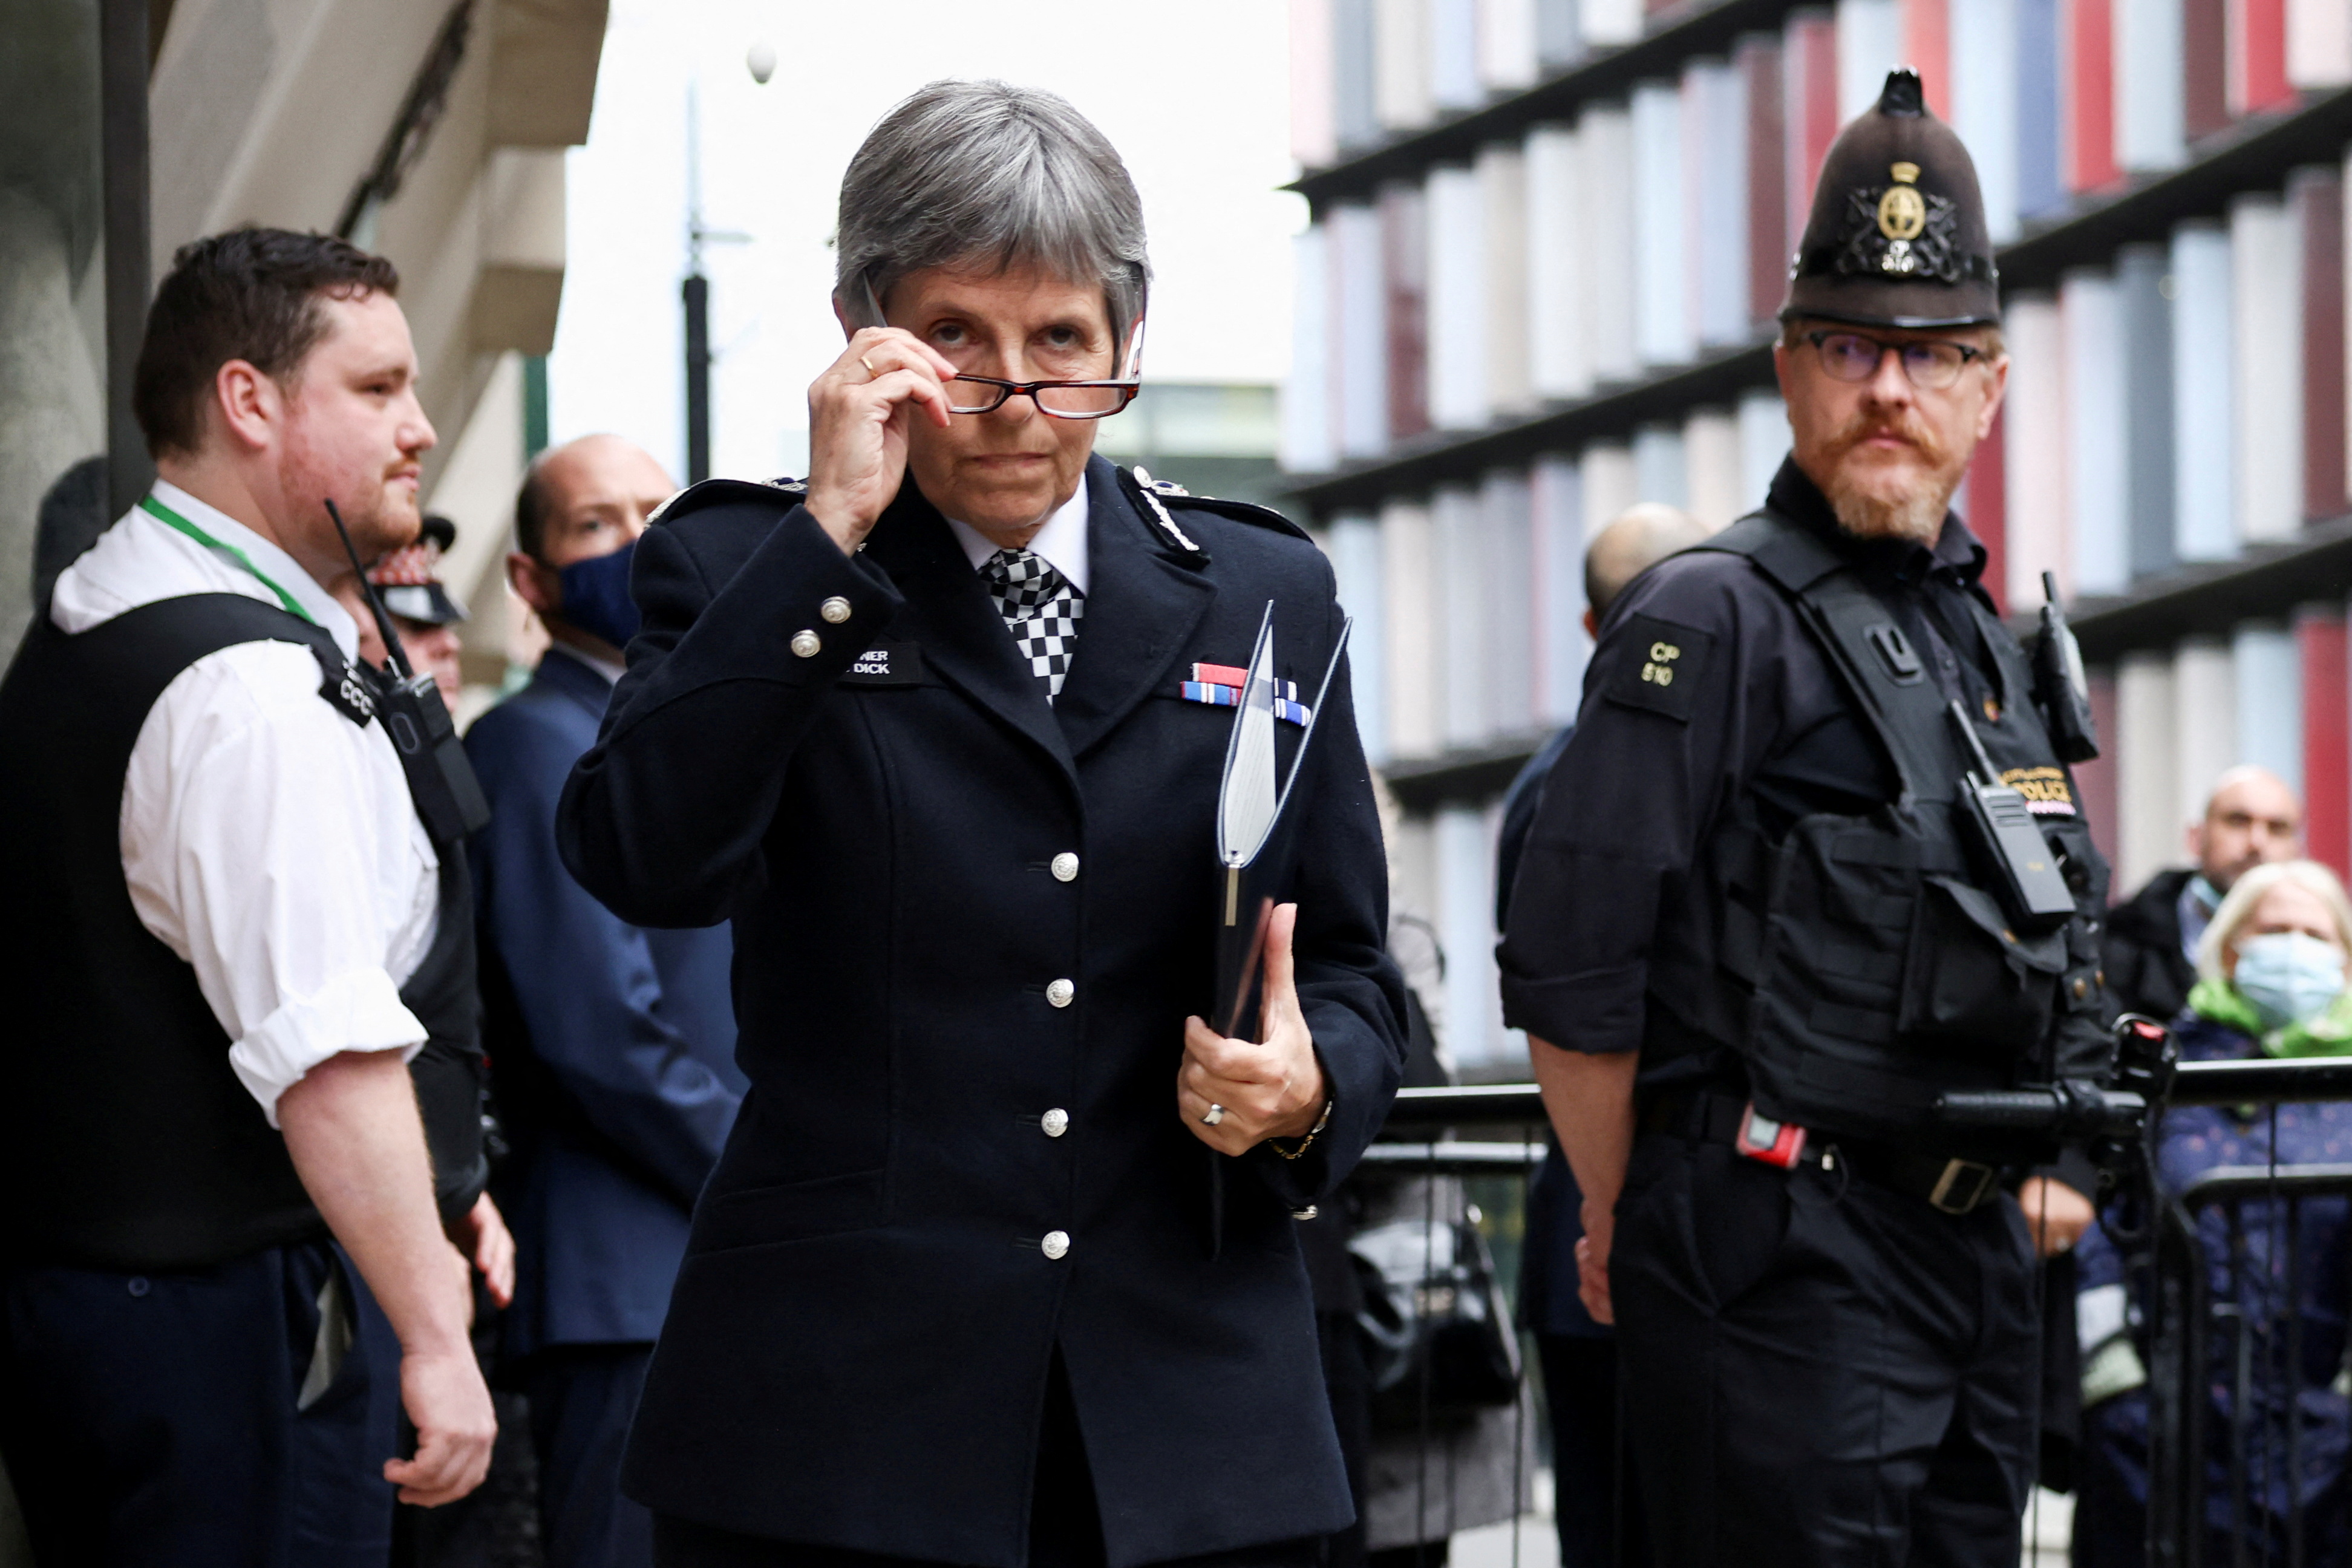 Metropolitan Police Commissioner Cressida Dick delivers a statement outside the Old Bailey, where police officer Wayne Couzens was sentenced following the murder of Sarah Everard, in London